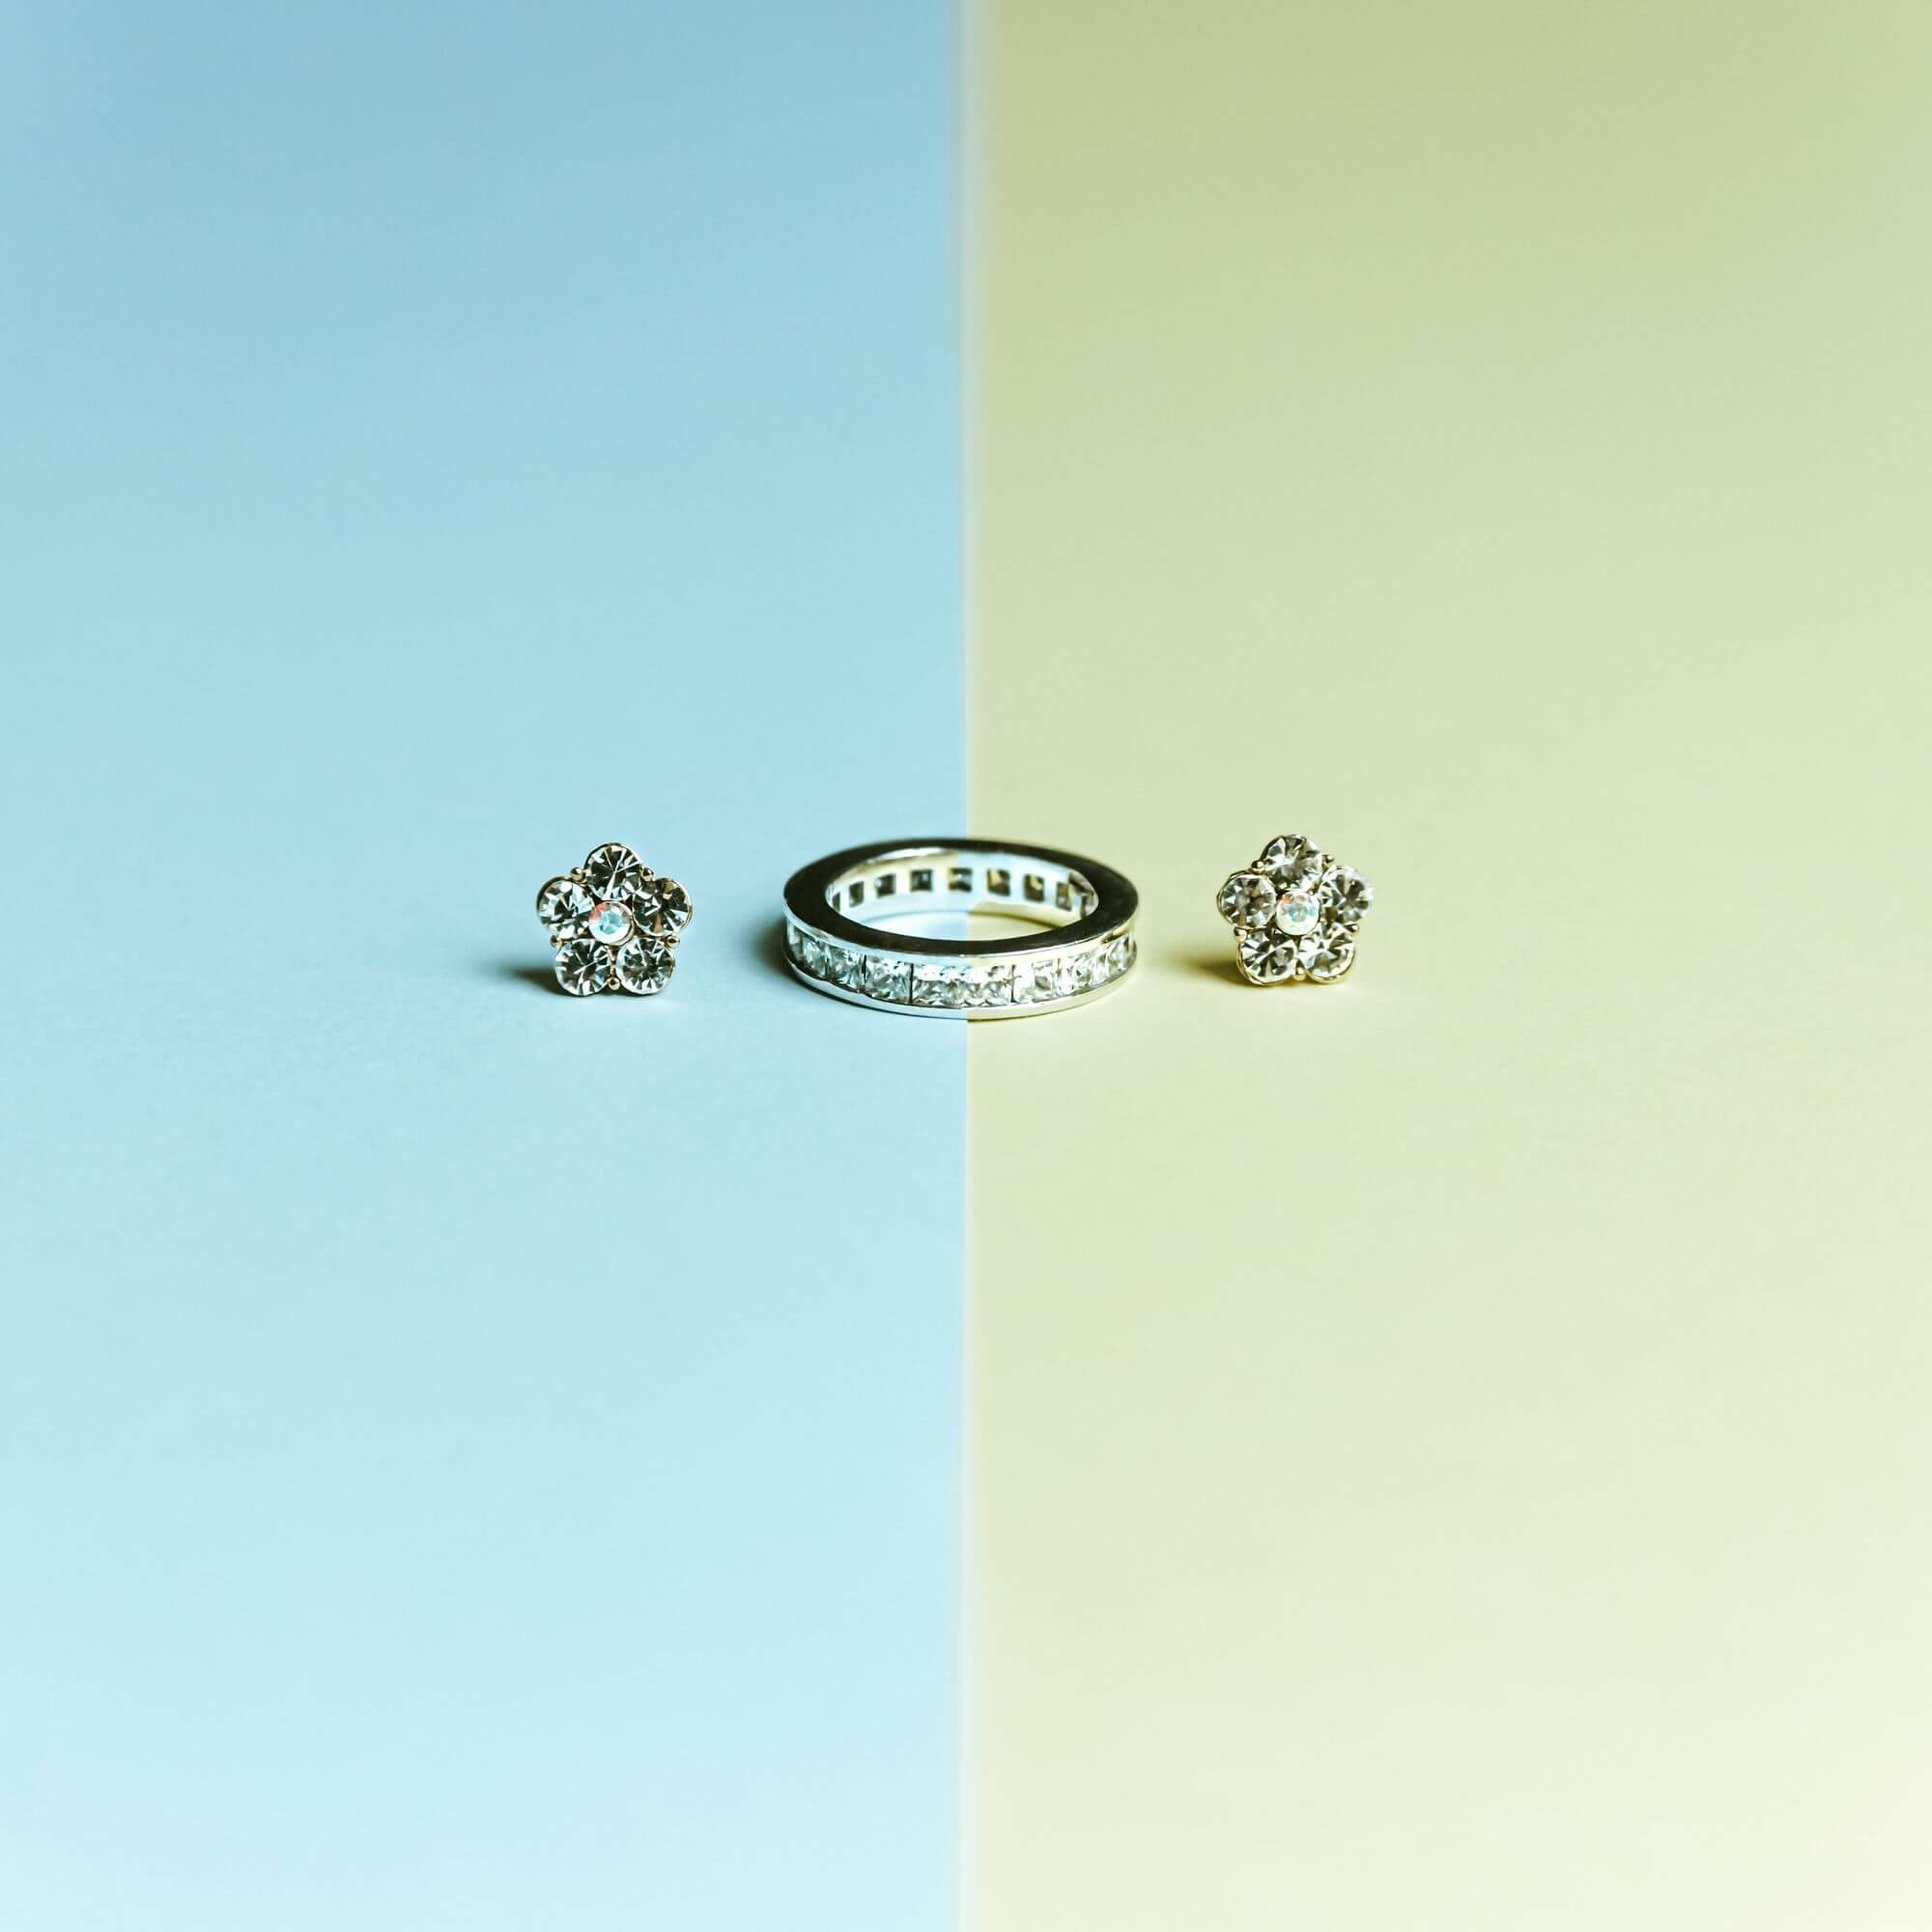 Silver earrings and a ring stored on a blue and green shelf